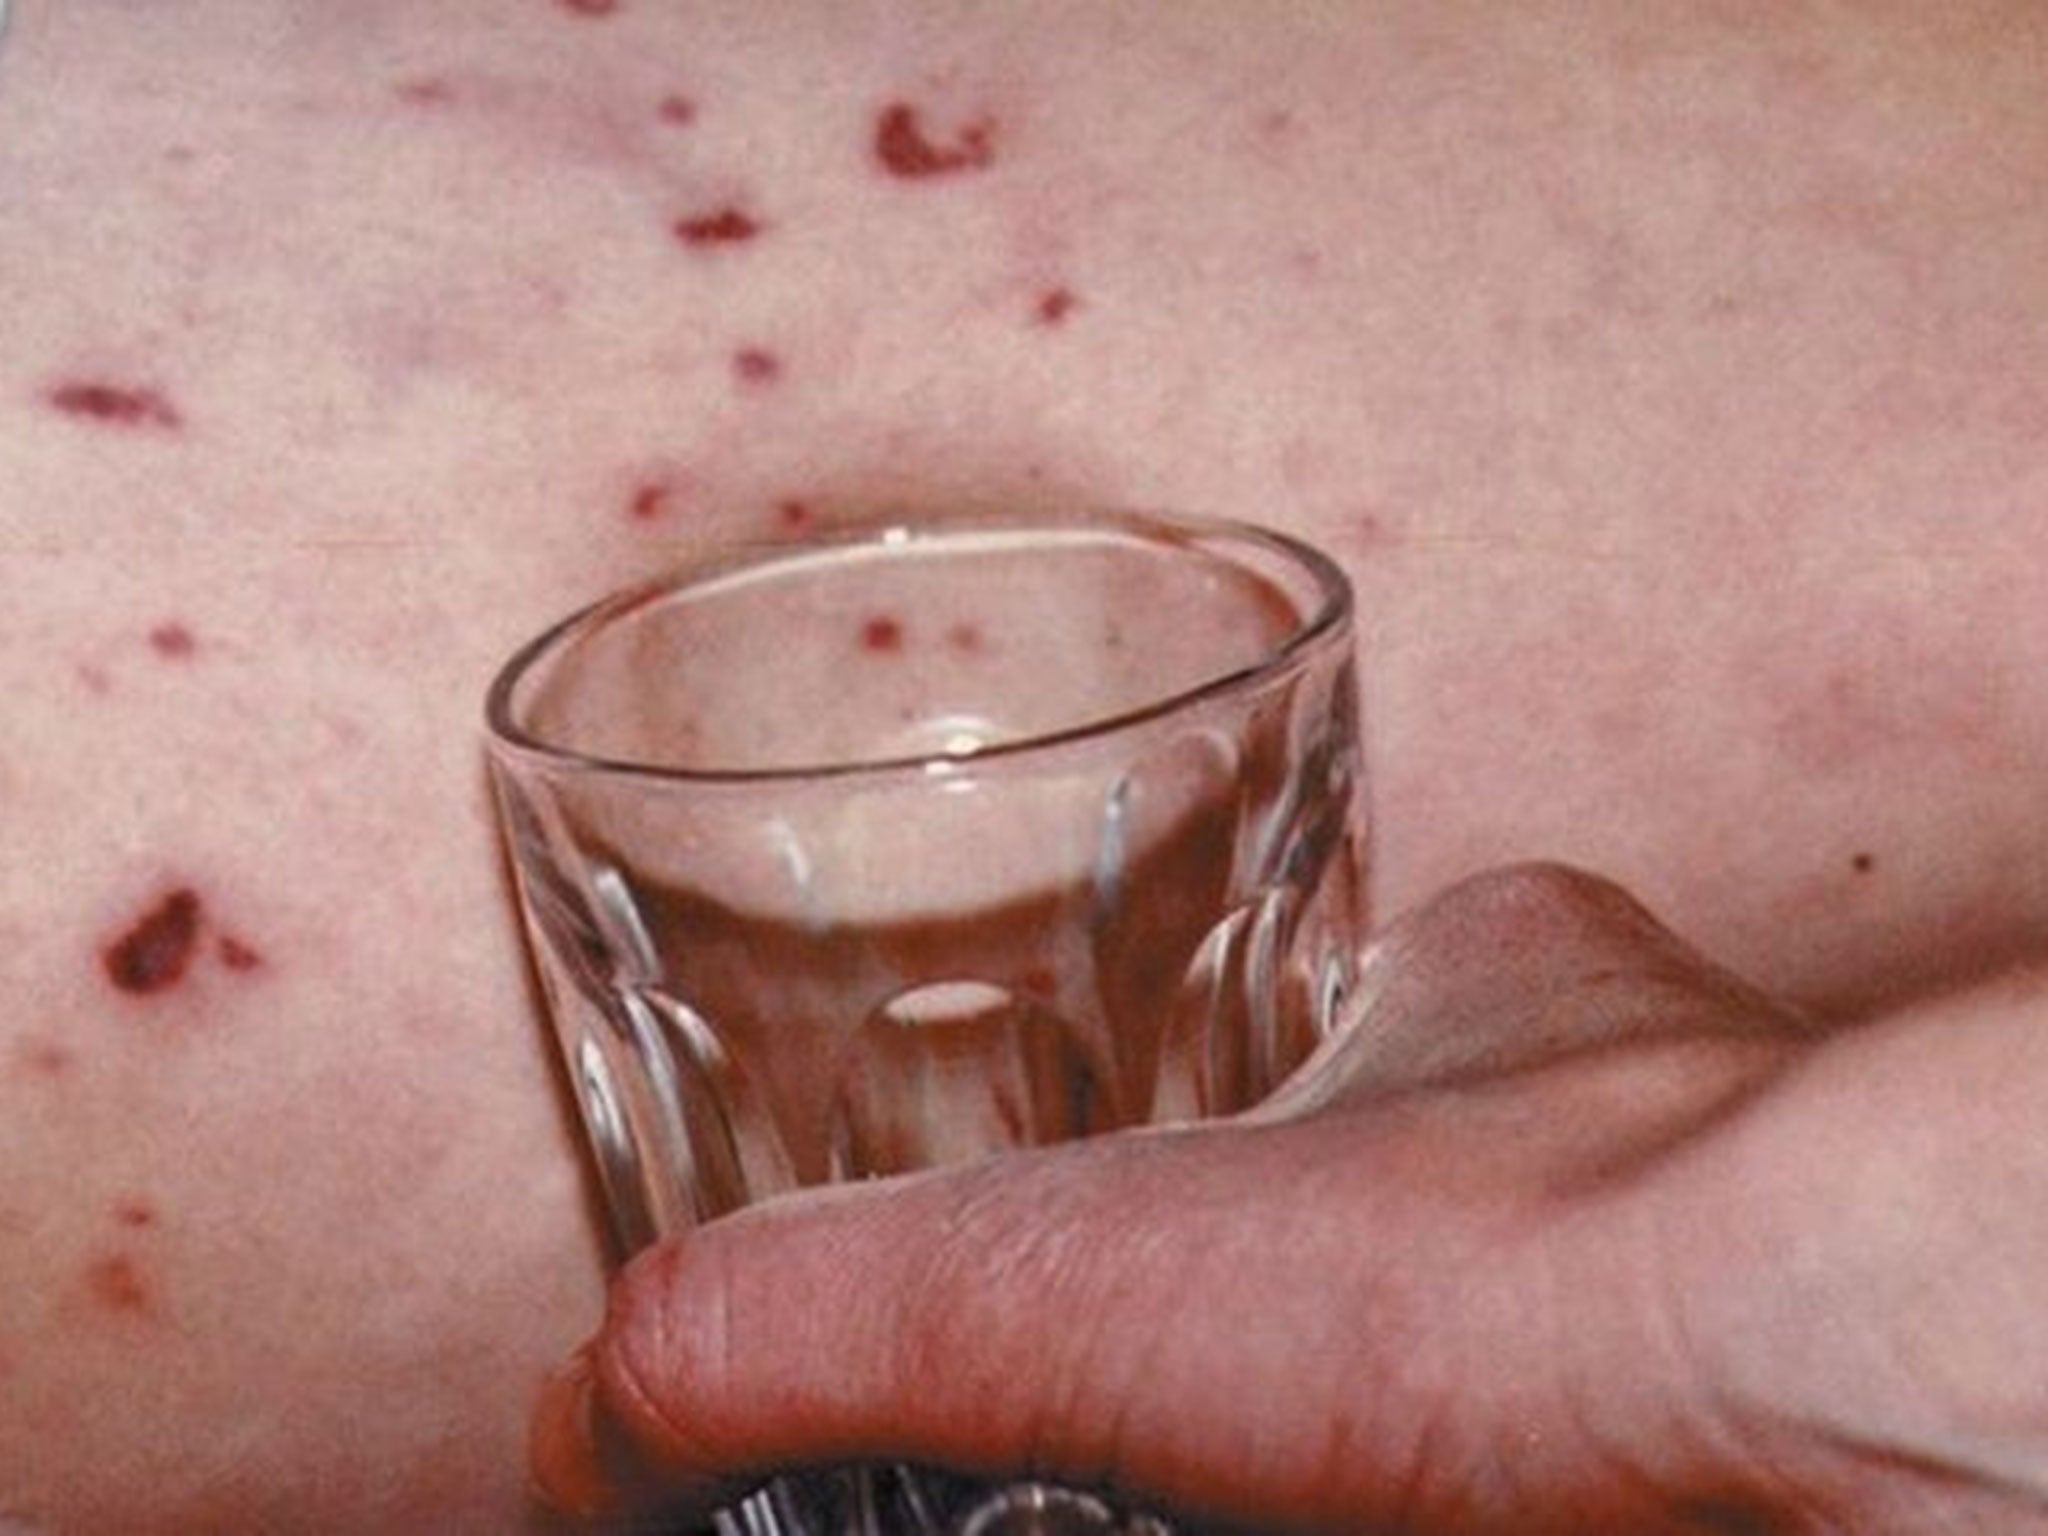 An example of a rash caused by meningitis